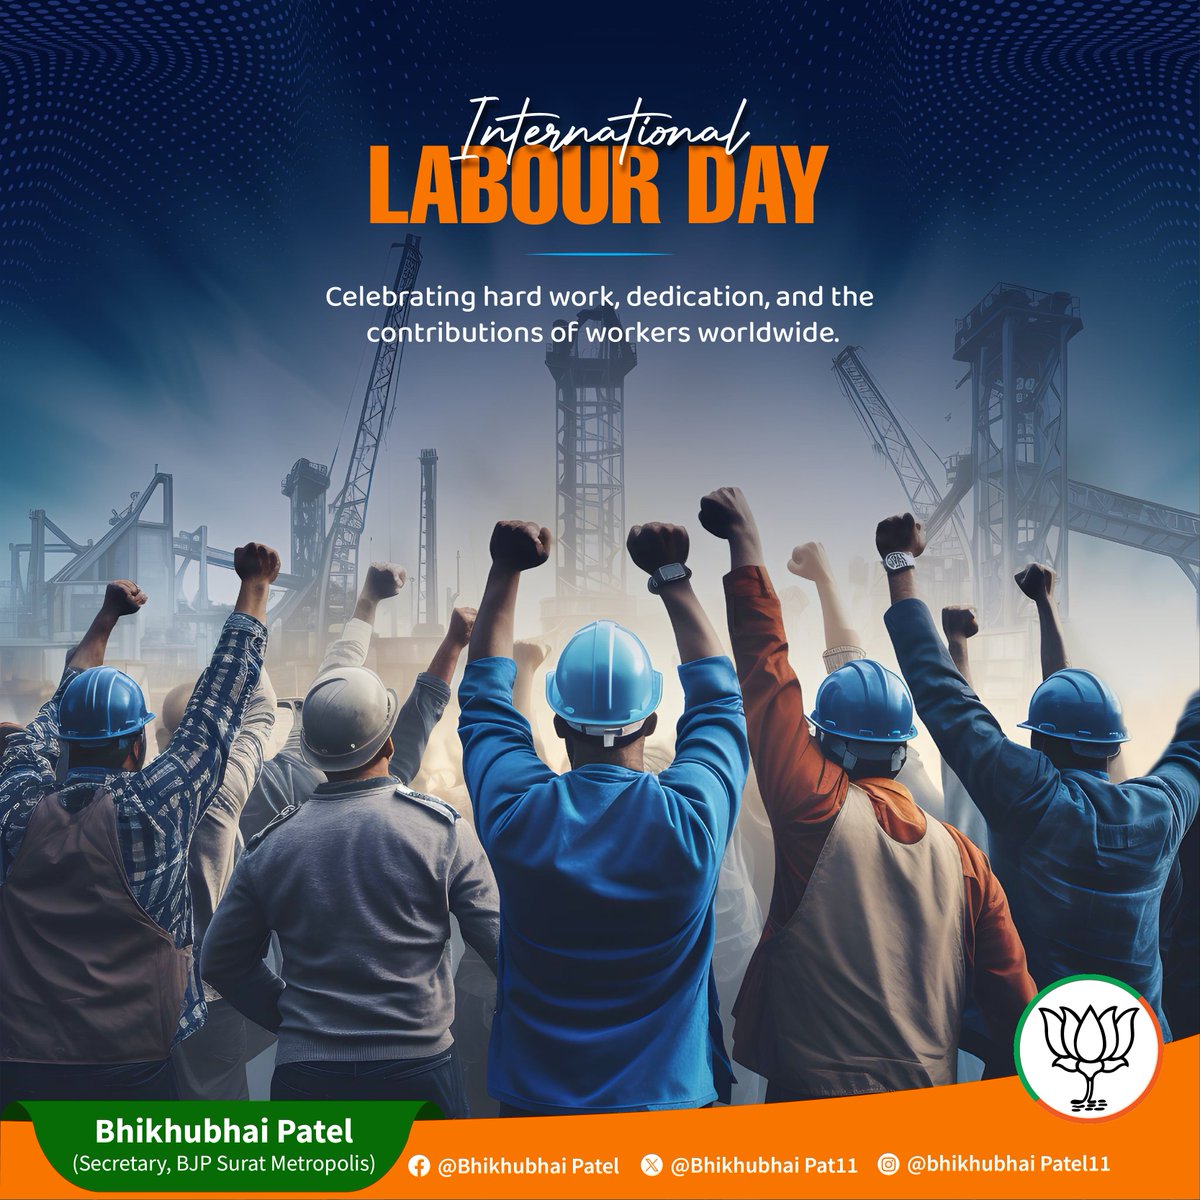 Today, we honor the hard work, dedication, and invaluable contributions of workers worldwide. Here's to building a future where every individual's efforts are recognized and valued.

International Labour Day!

#labourday #workersrights #solidarity #fairwages #bhikhubhaipatel